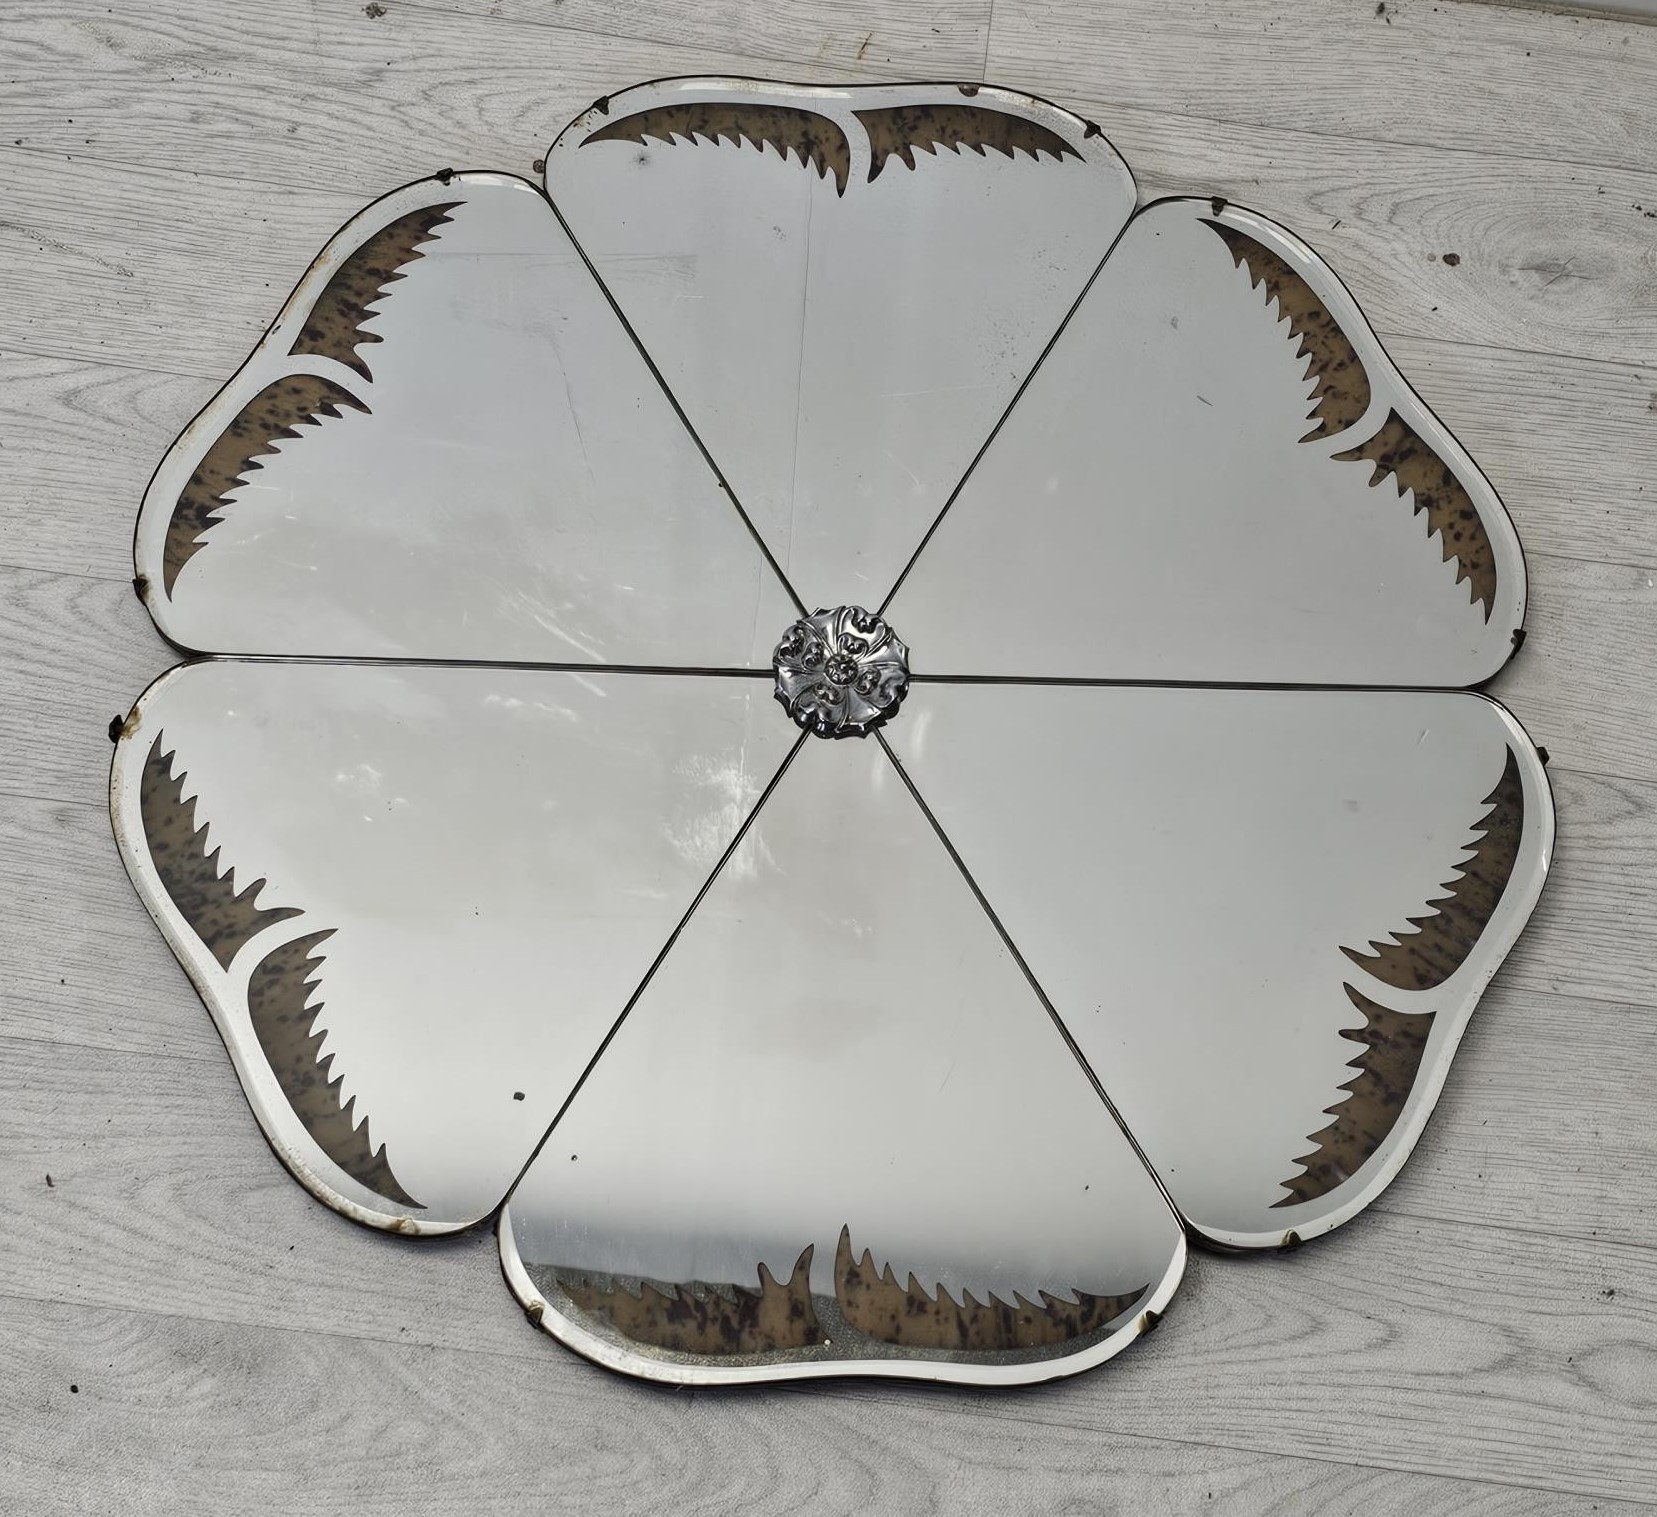 Art Deco wall mirror, vintage of flowerhead form with faux tortoiseshell inlaid decoration. H.65 W.